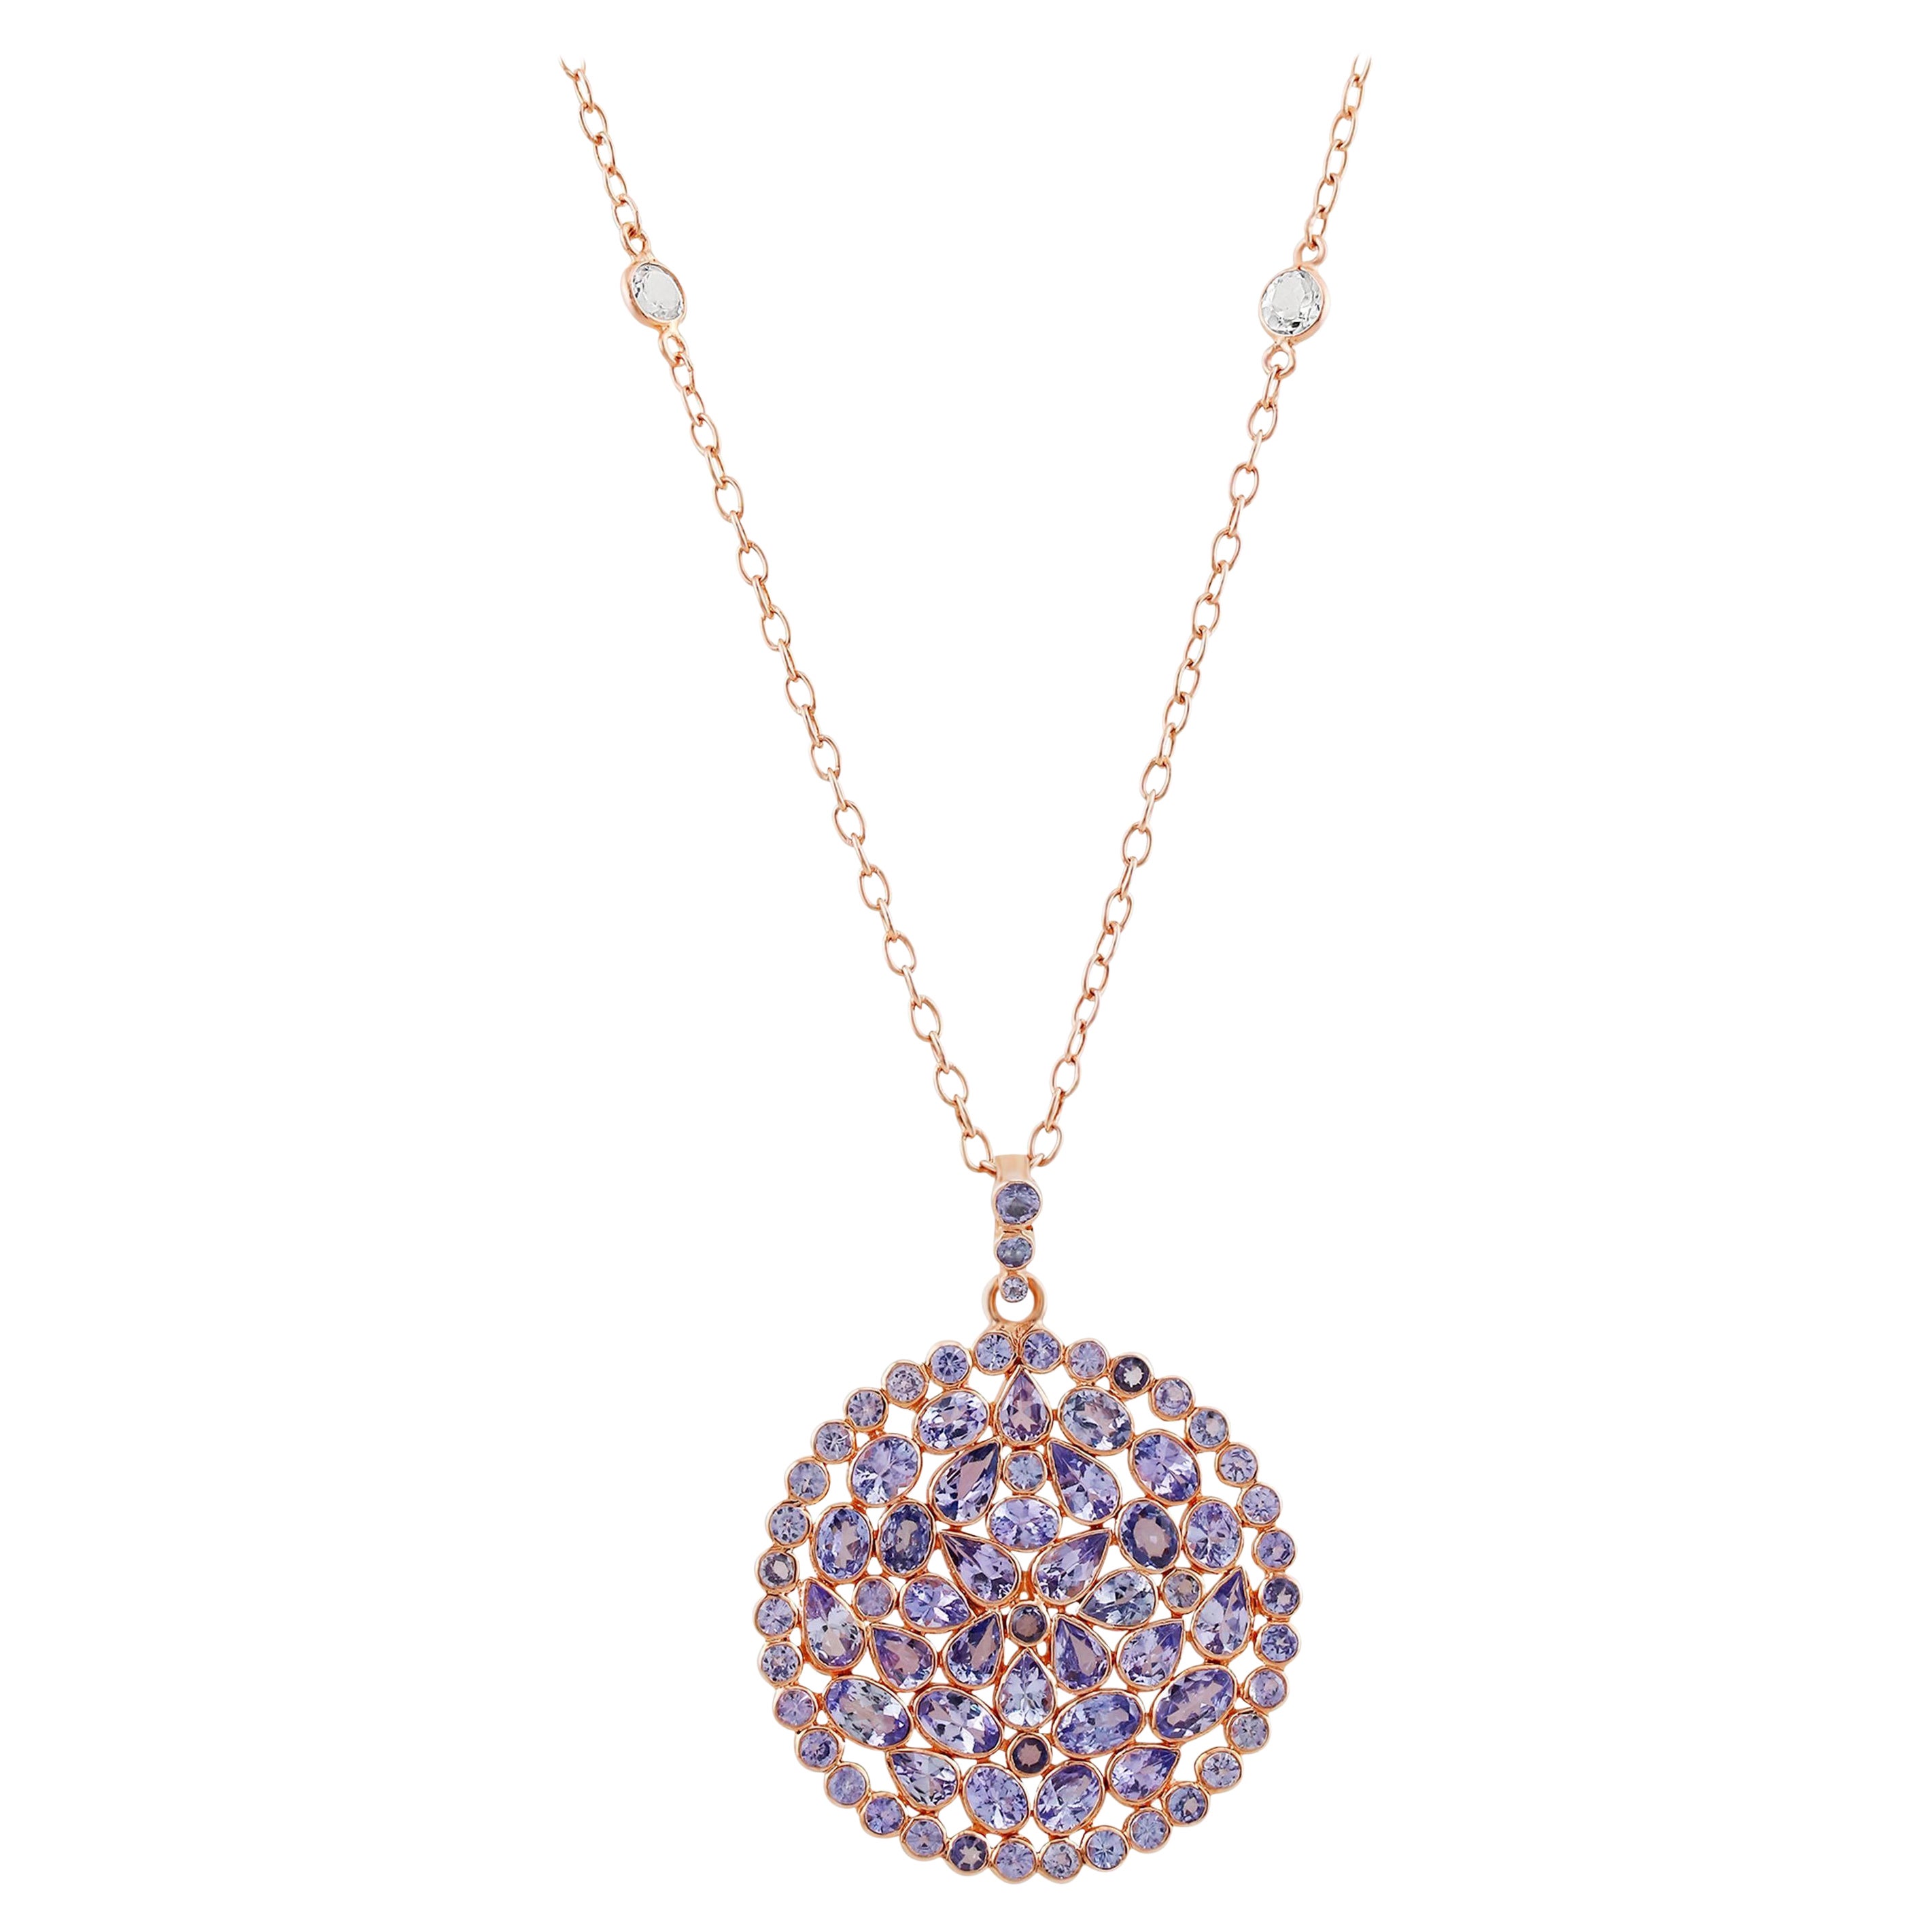 Gemistry Victorian 7.7cts, Tanzanite Floral Pendant Necklace in Sterling Silver